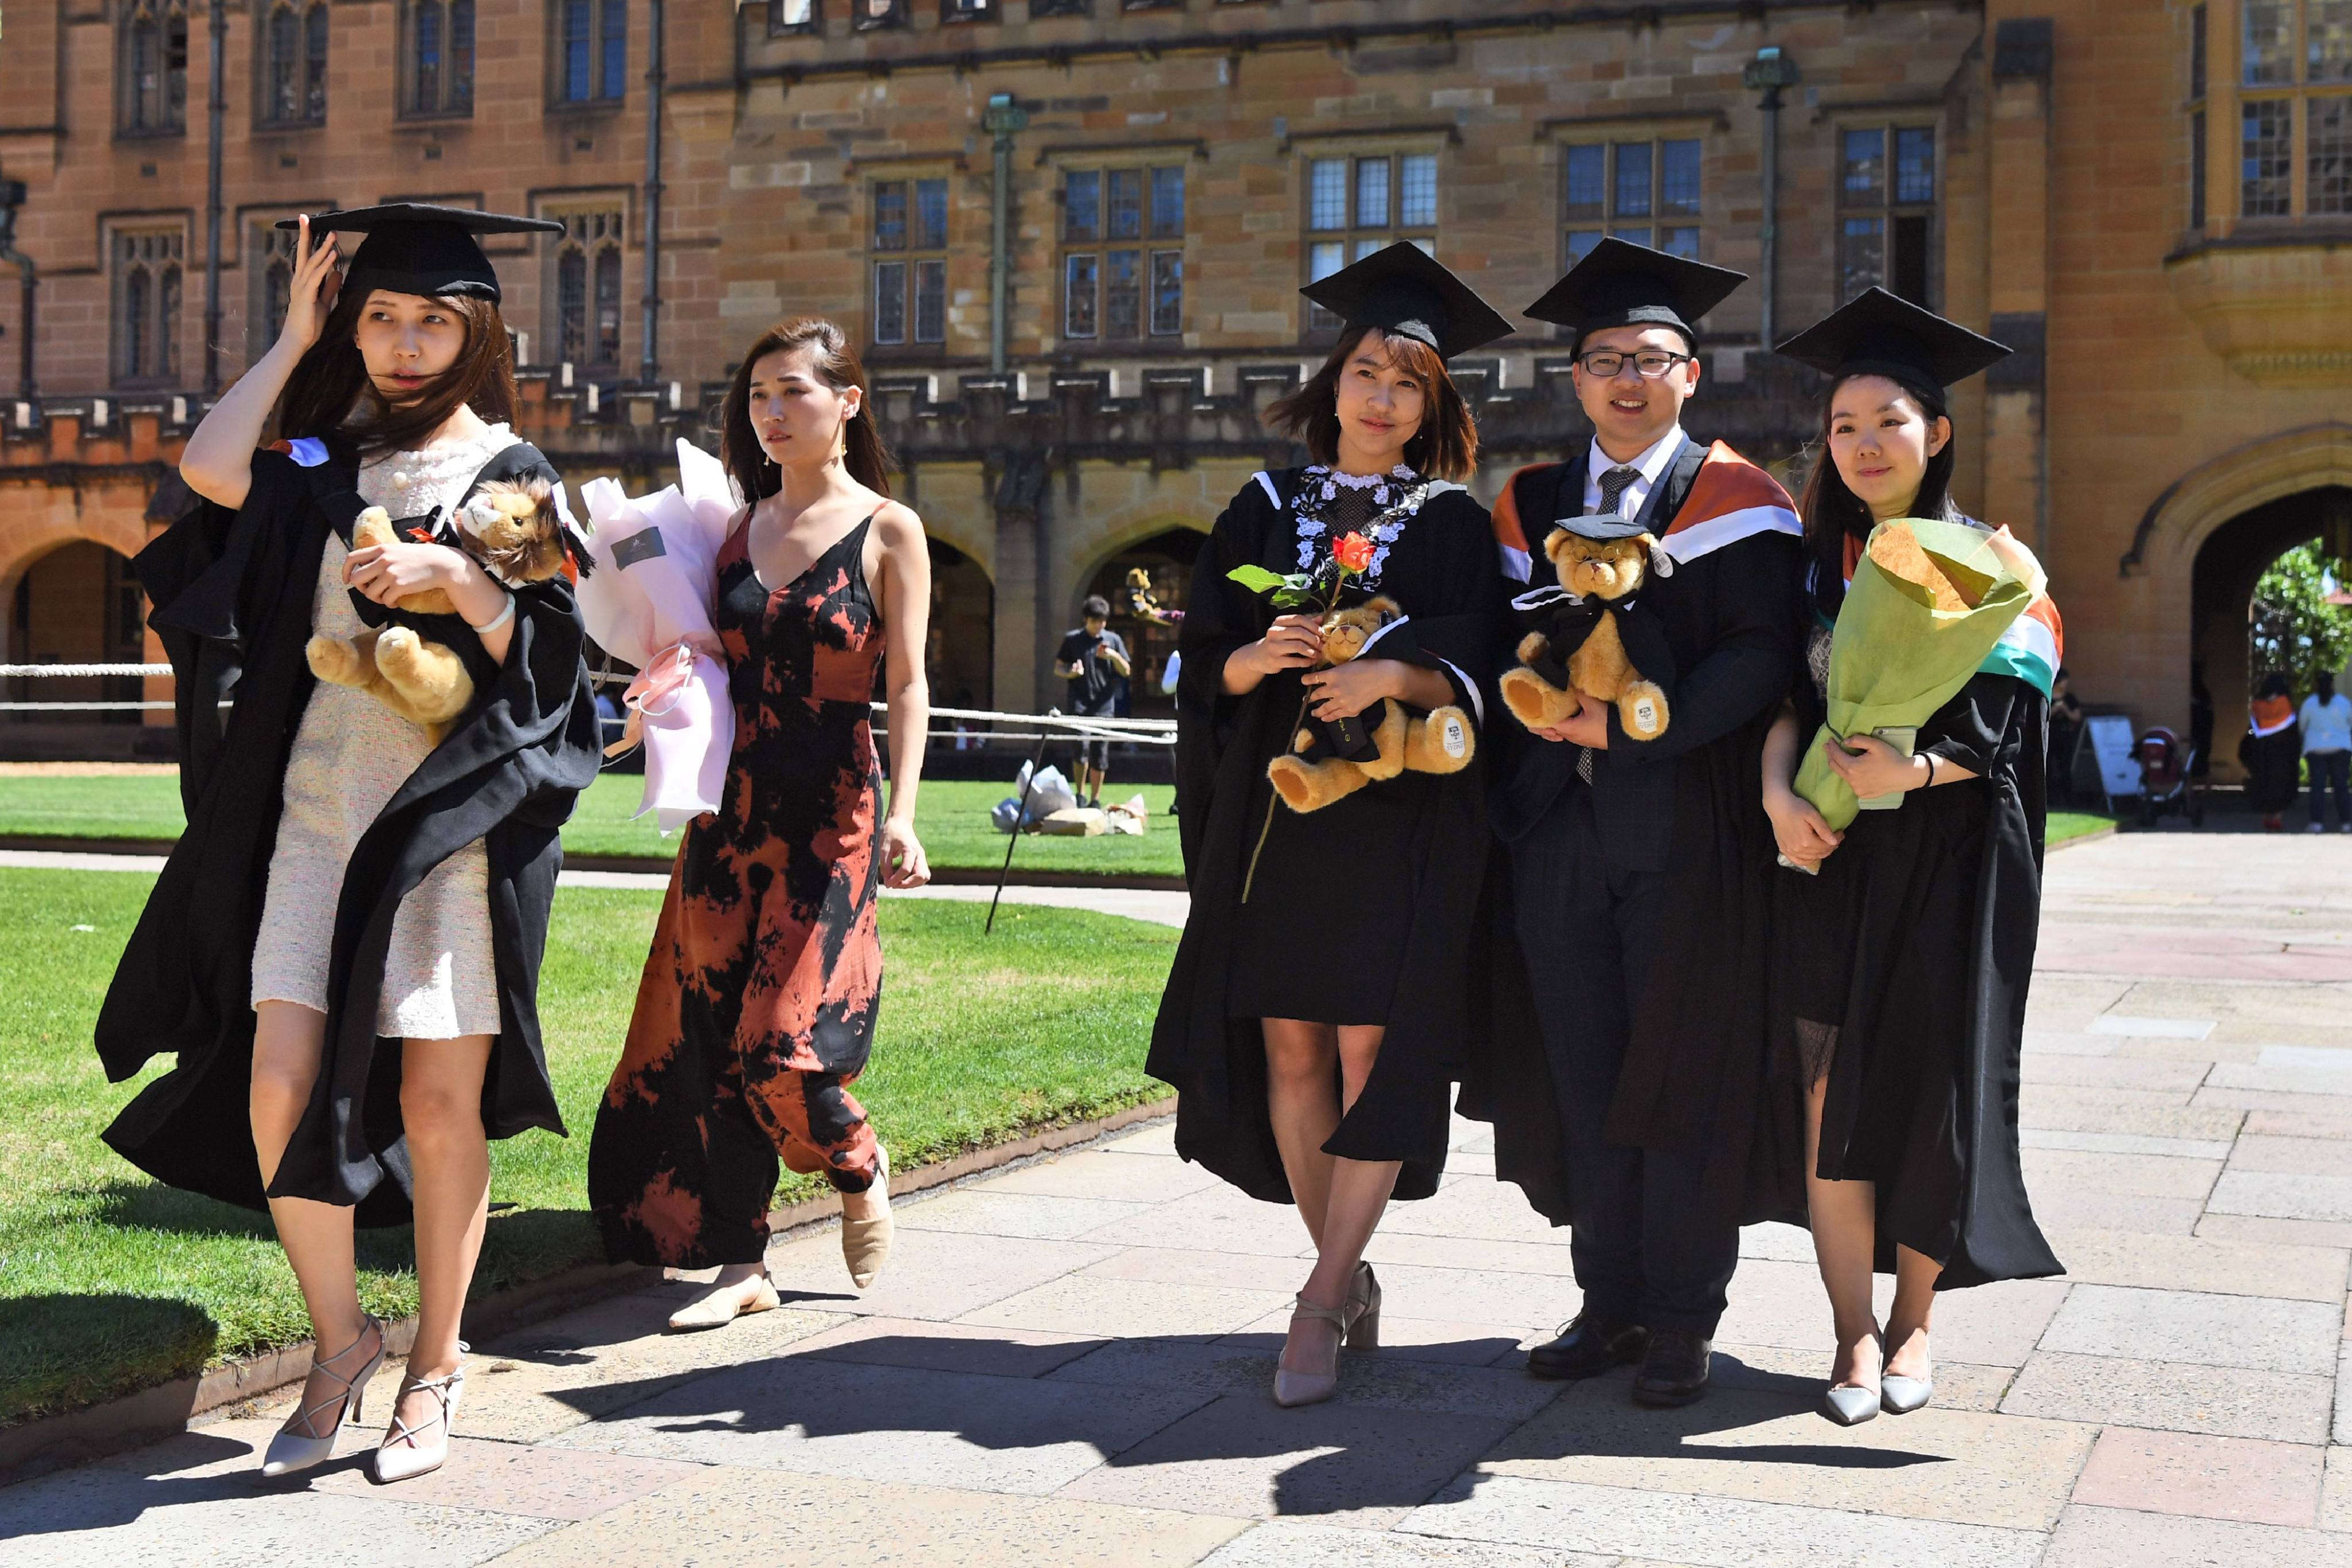 Students from China pose for family photos after graduating from a course in commerce at Sydney University on October 12, 2017. Families are rethinking sending their students to study abroad amid changed economic circumstances. Photo: AFP